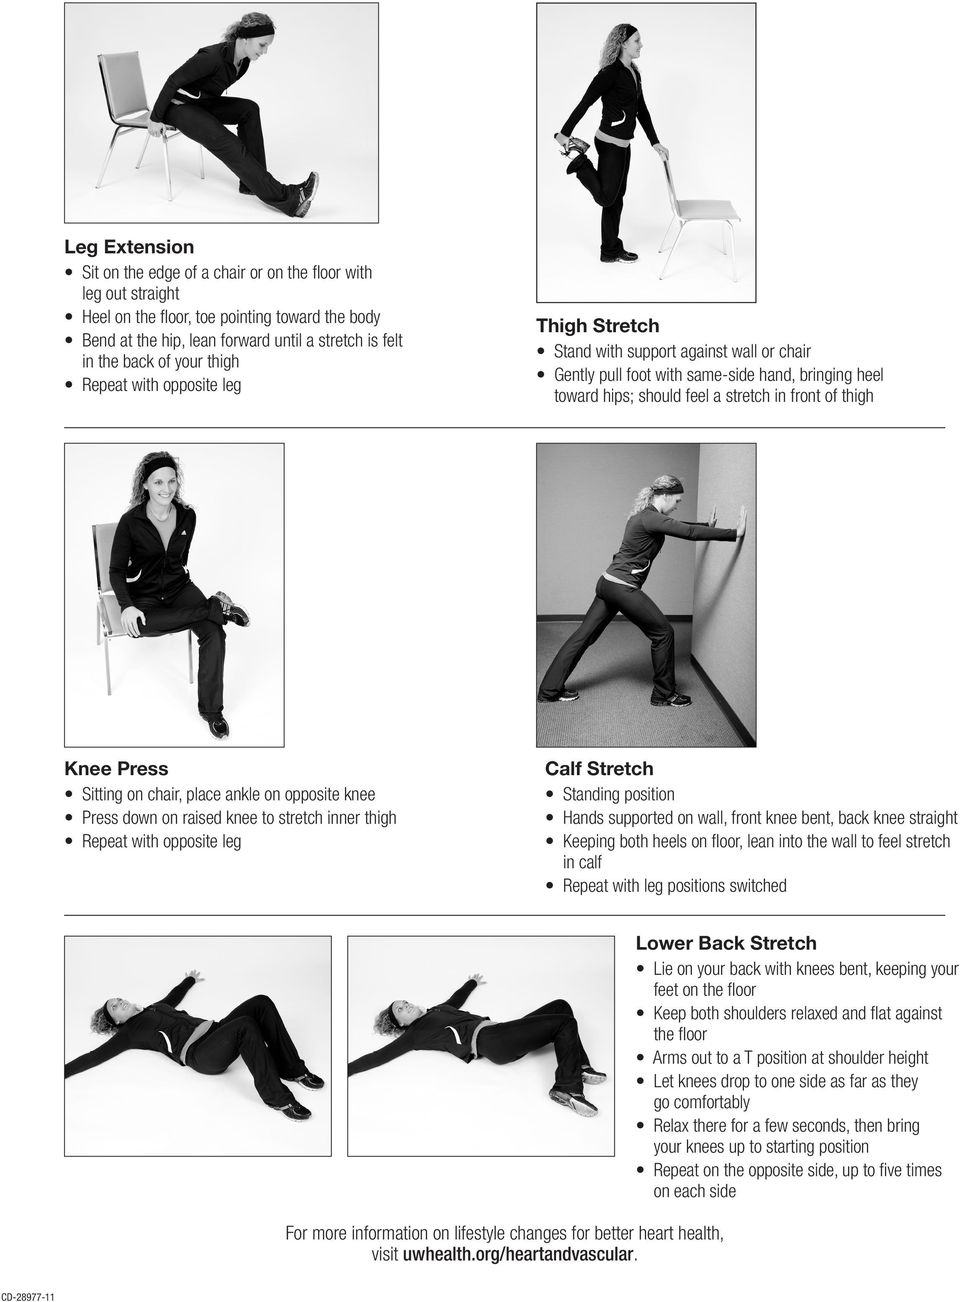 Knee Press Sitting on chair, place ankle on opposite knee Press down on raised knee to stretch inner thigh Repeat with opposite leg Calf Stretch Standing position Hands supported on wall, front knee